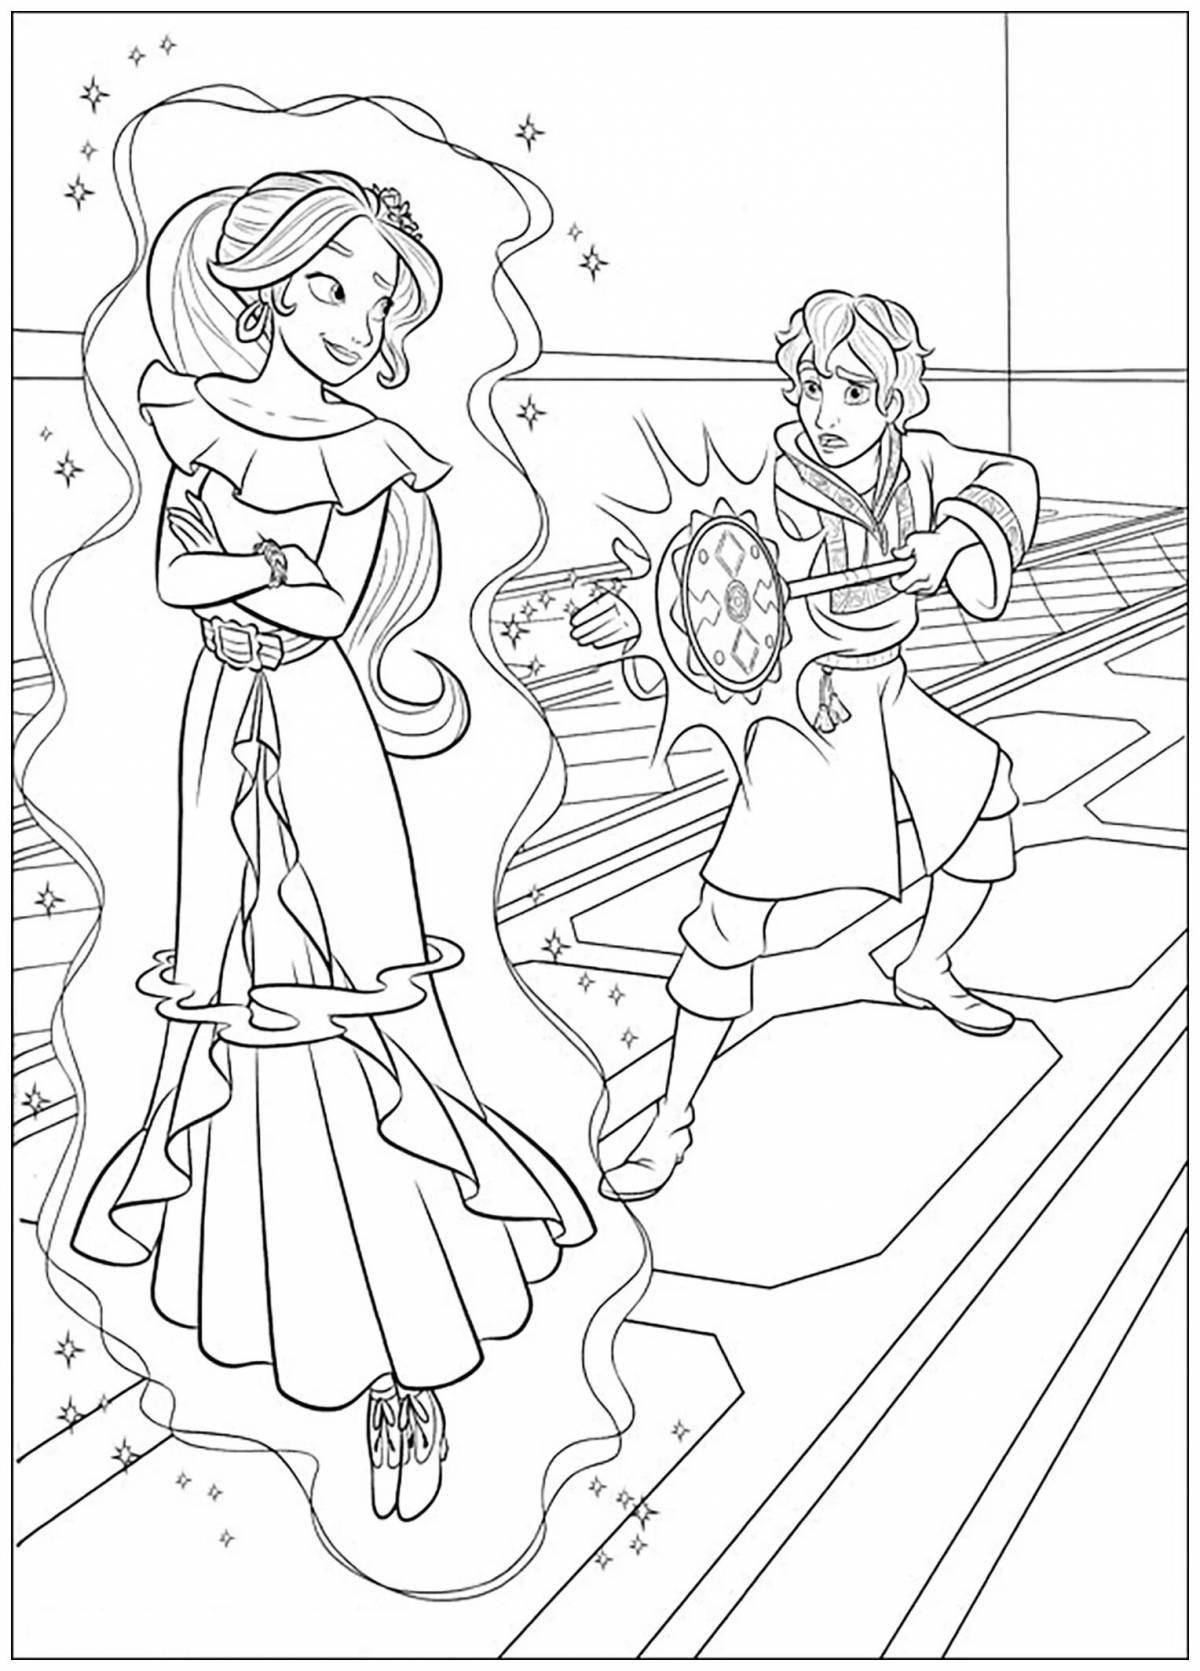 Exotic elena of avalor coloring book